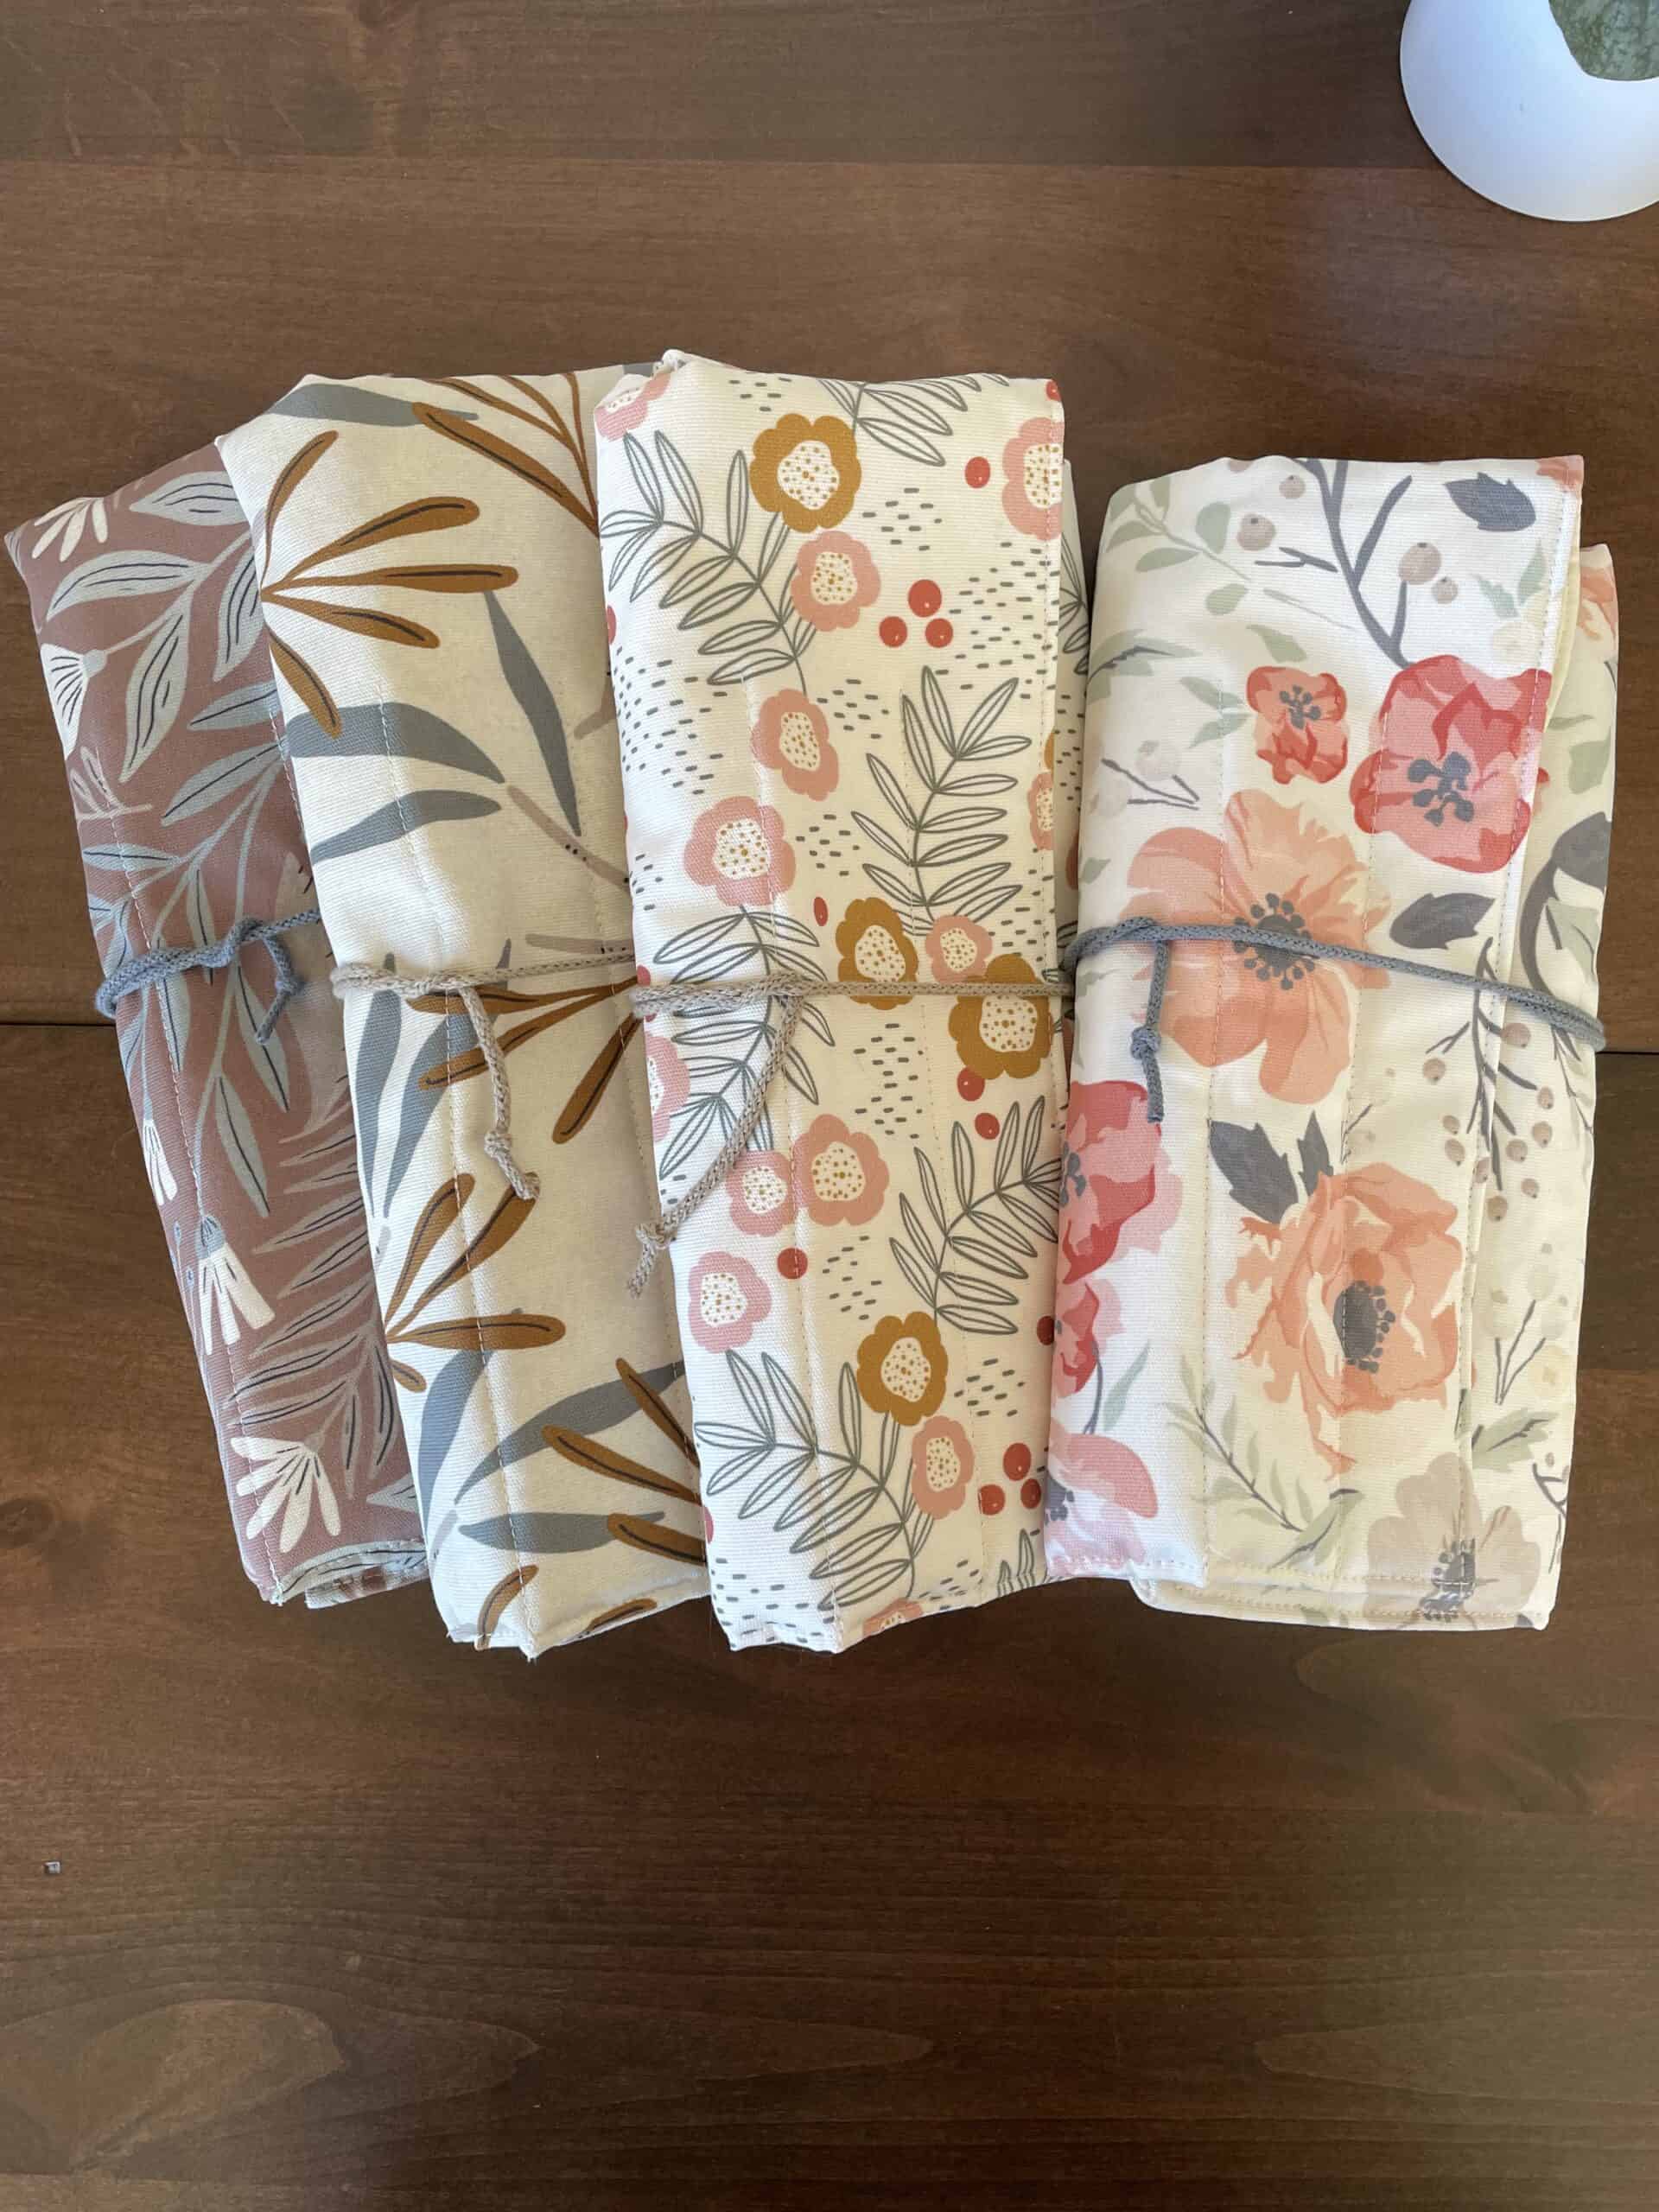 A collection of four folded needle roll cases in a variety of floral prints.